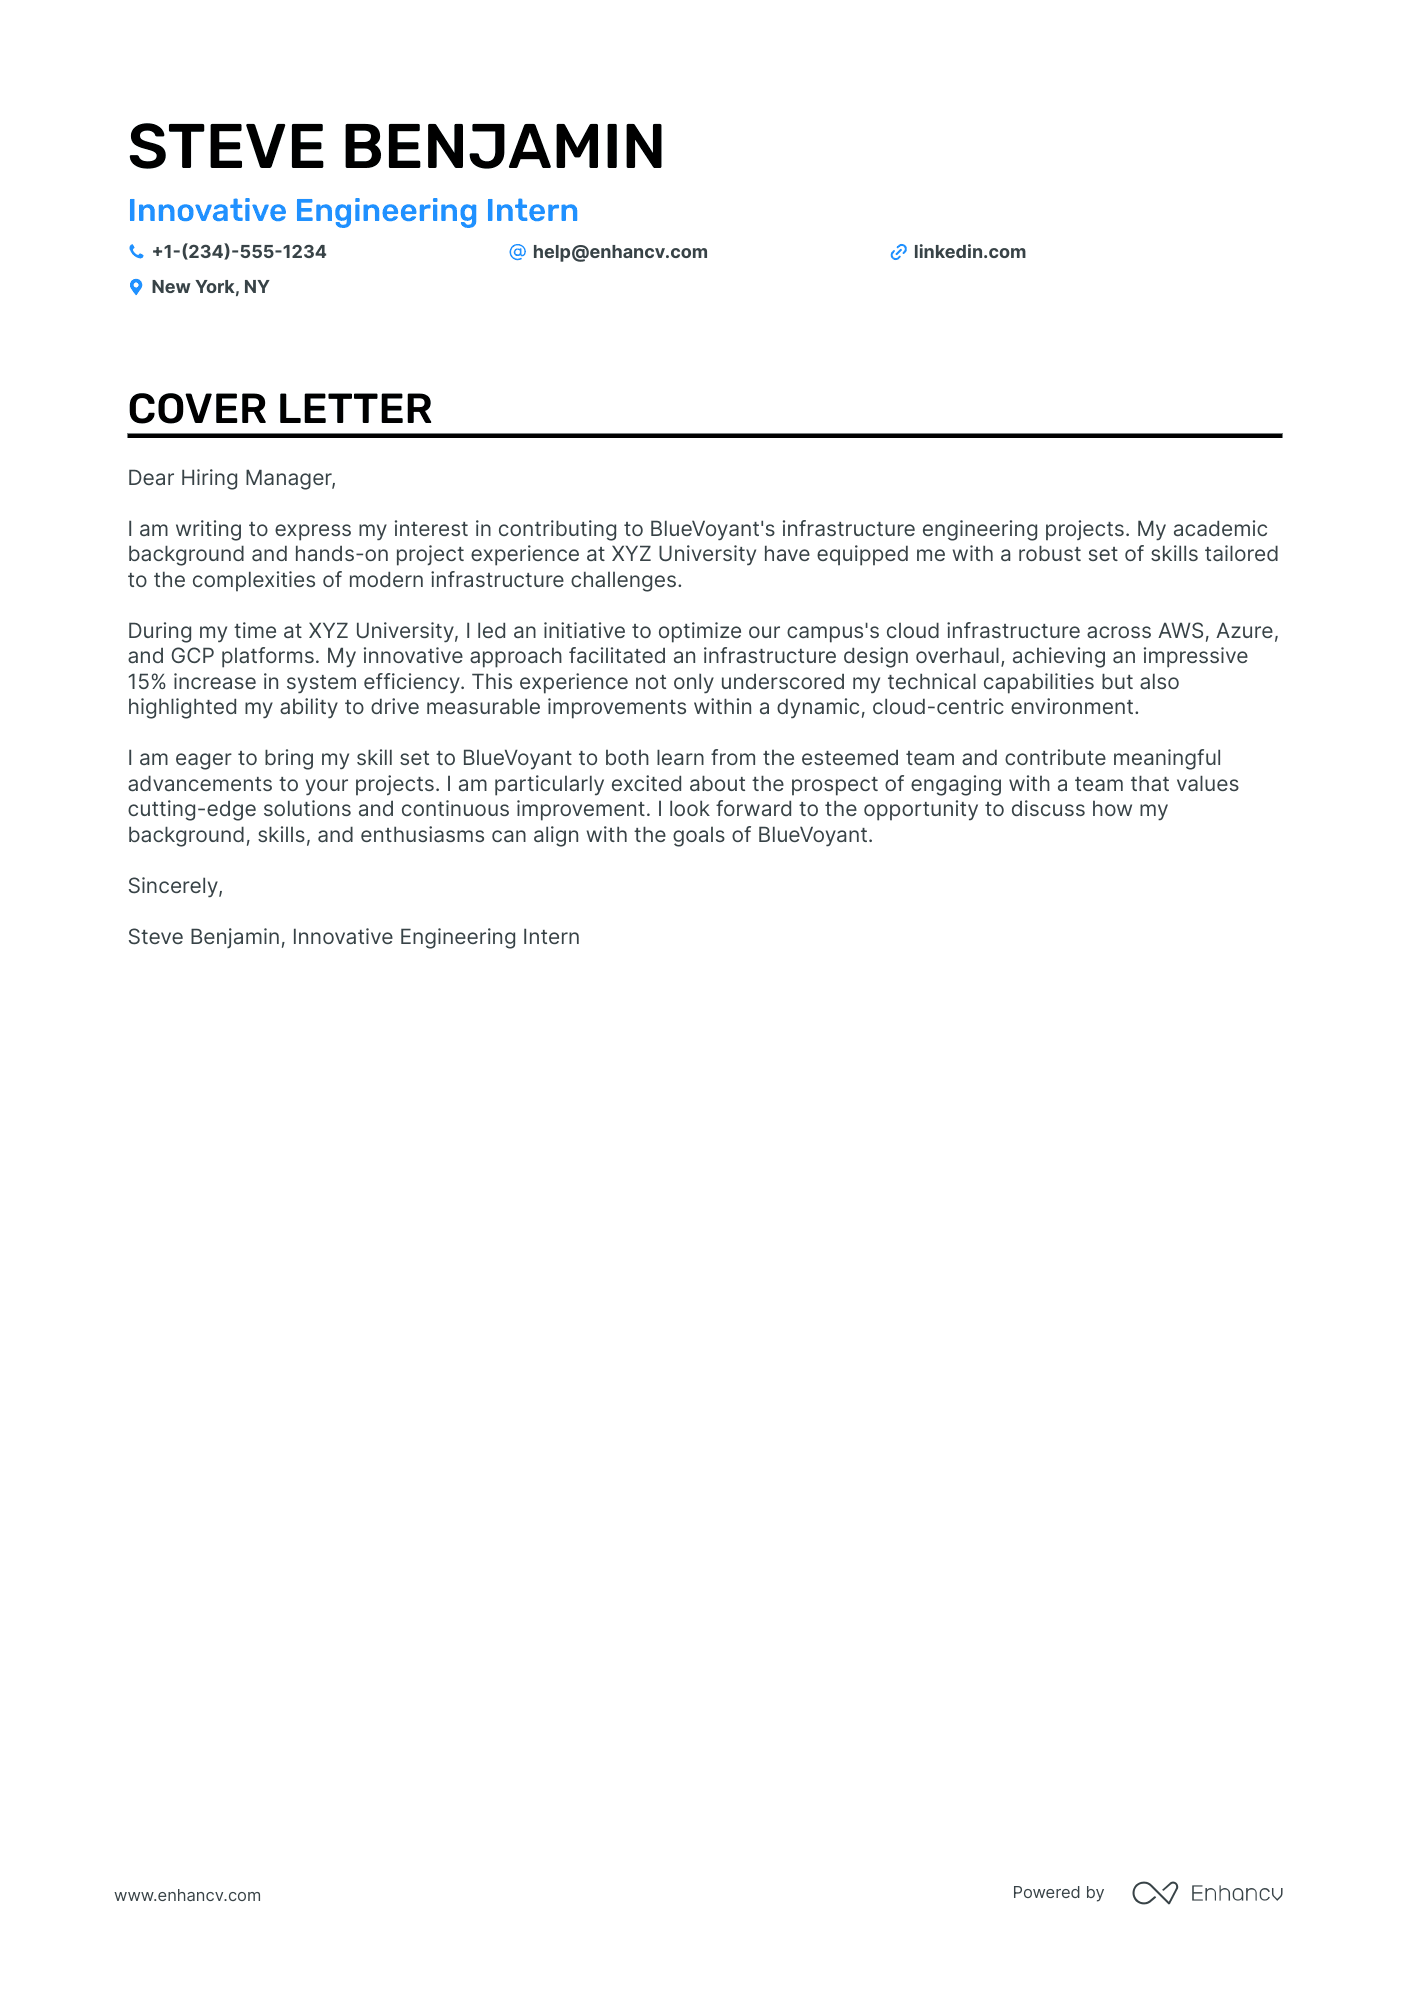 Engineering Intern cover letter